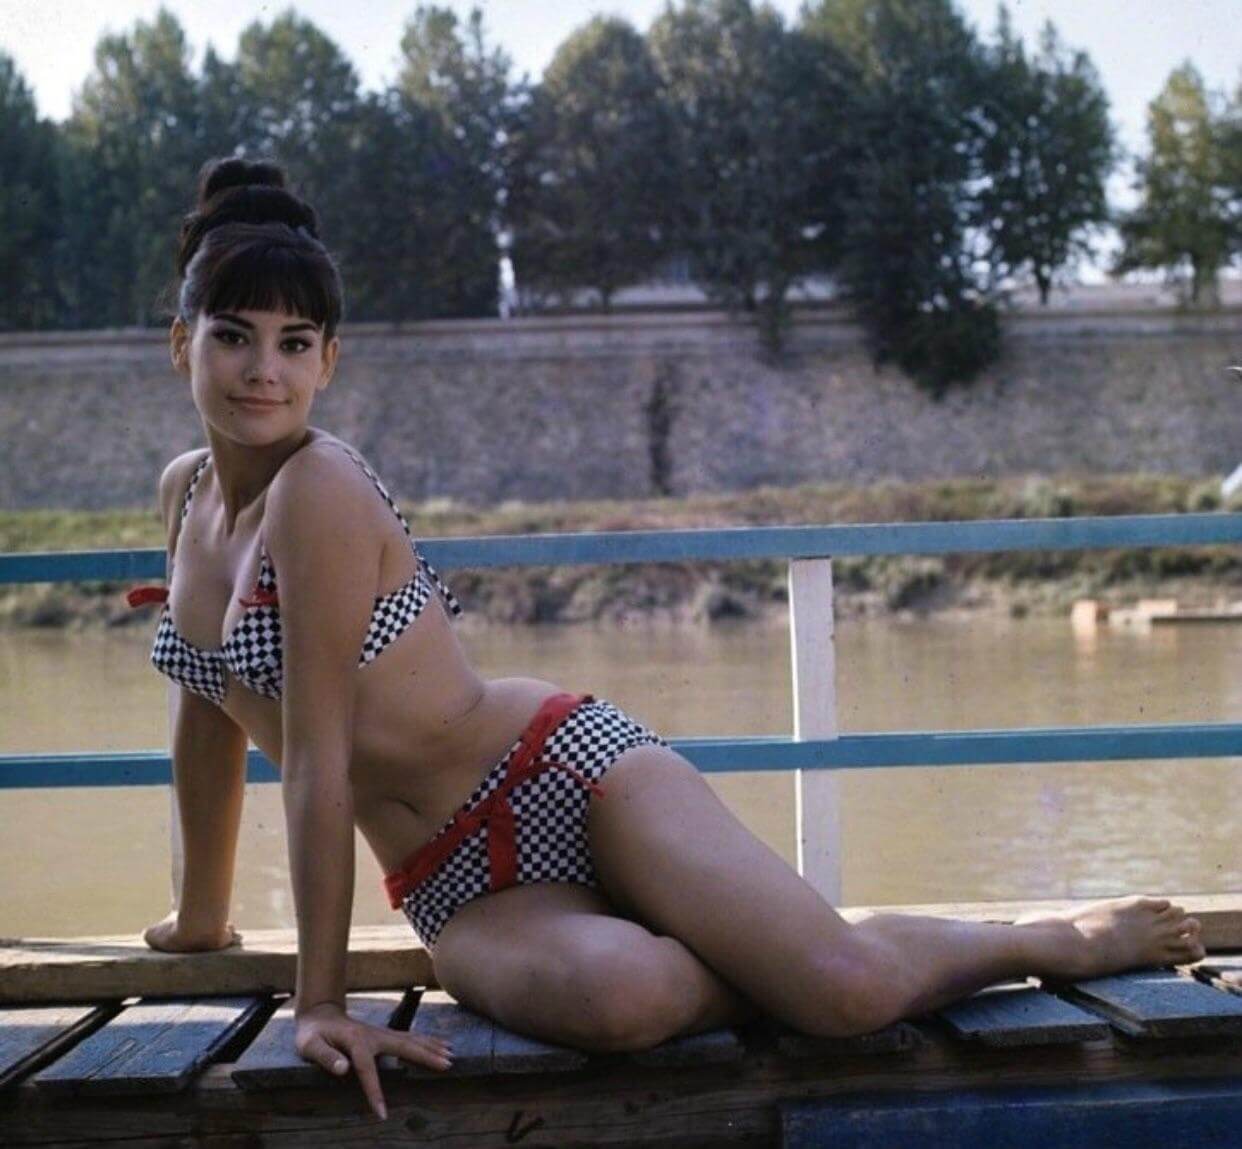 49 Hot Pictures Of Claudine Auger That Are Simply Gorgeous | Best Of Comic Books